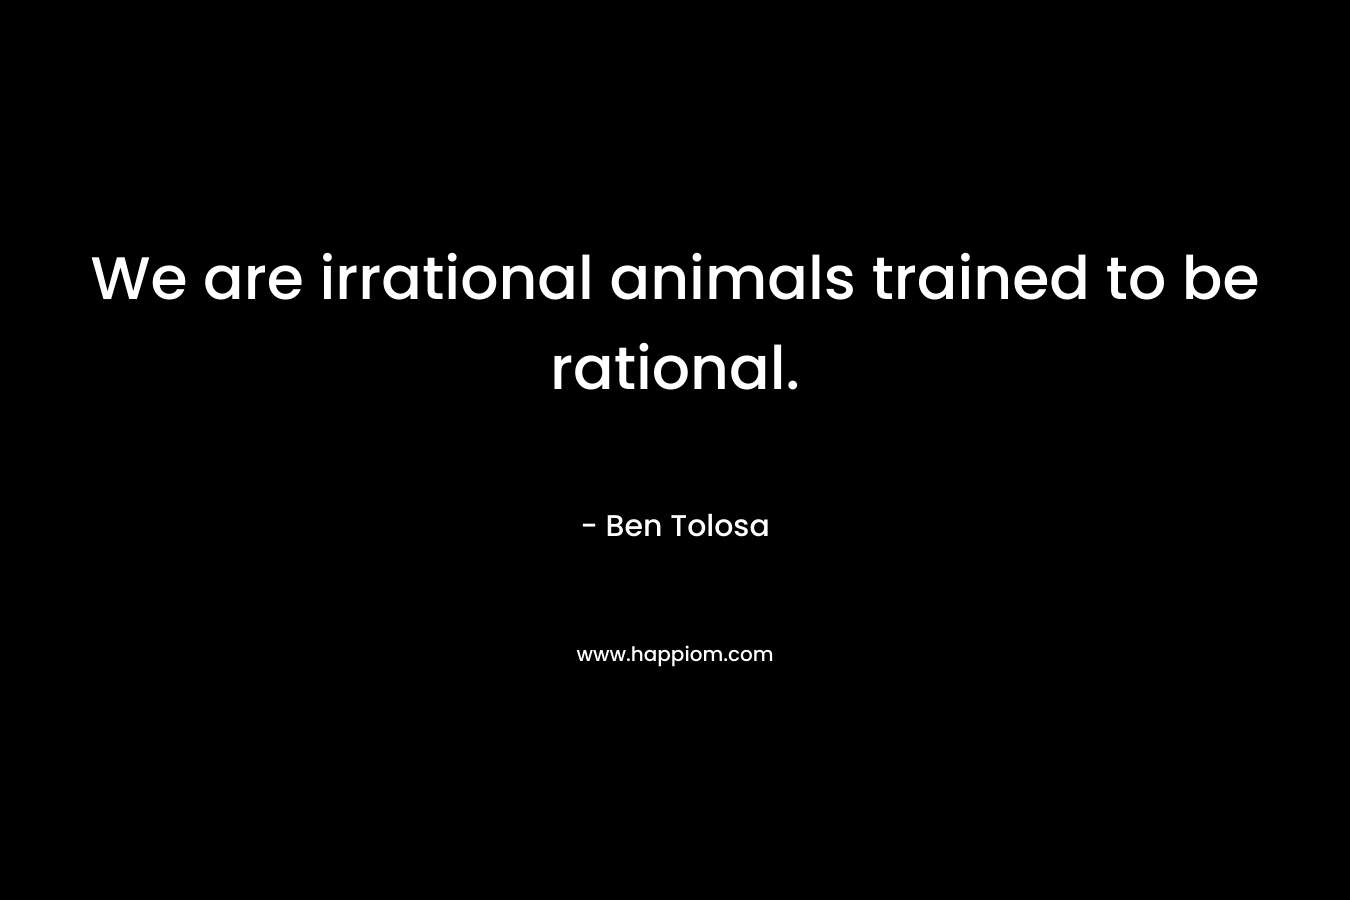 We are irrational animals trained to be rational. – Ben Tolosa